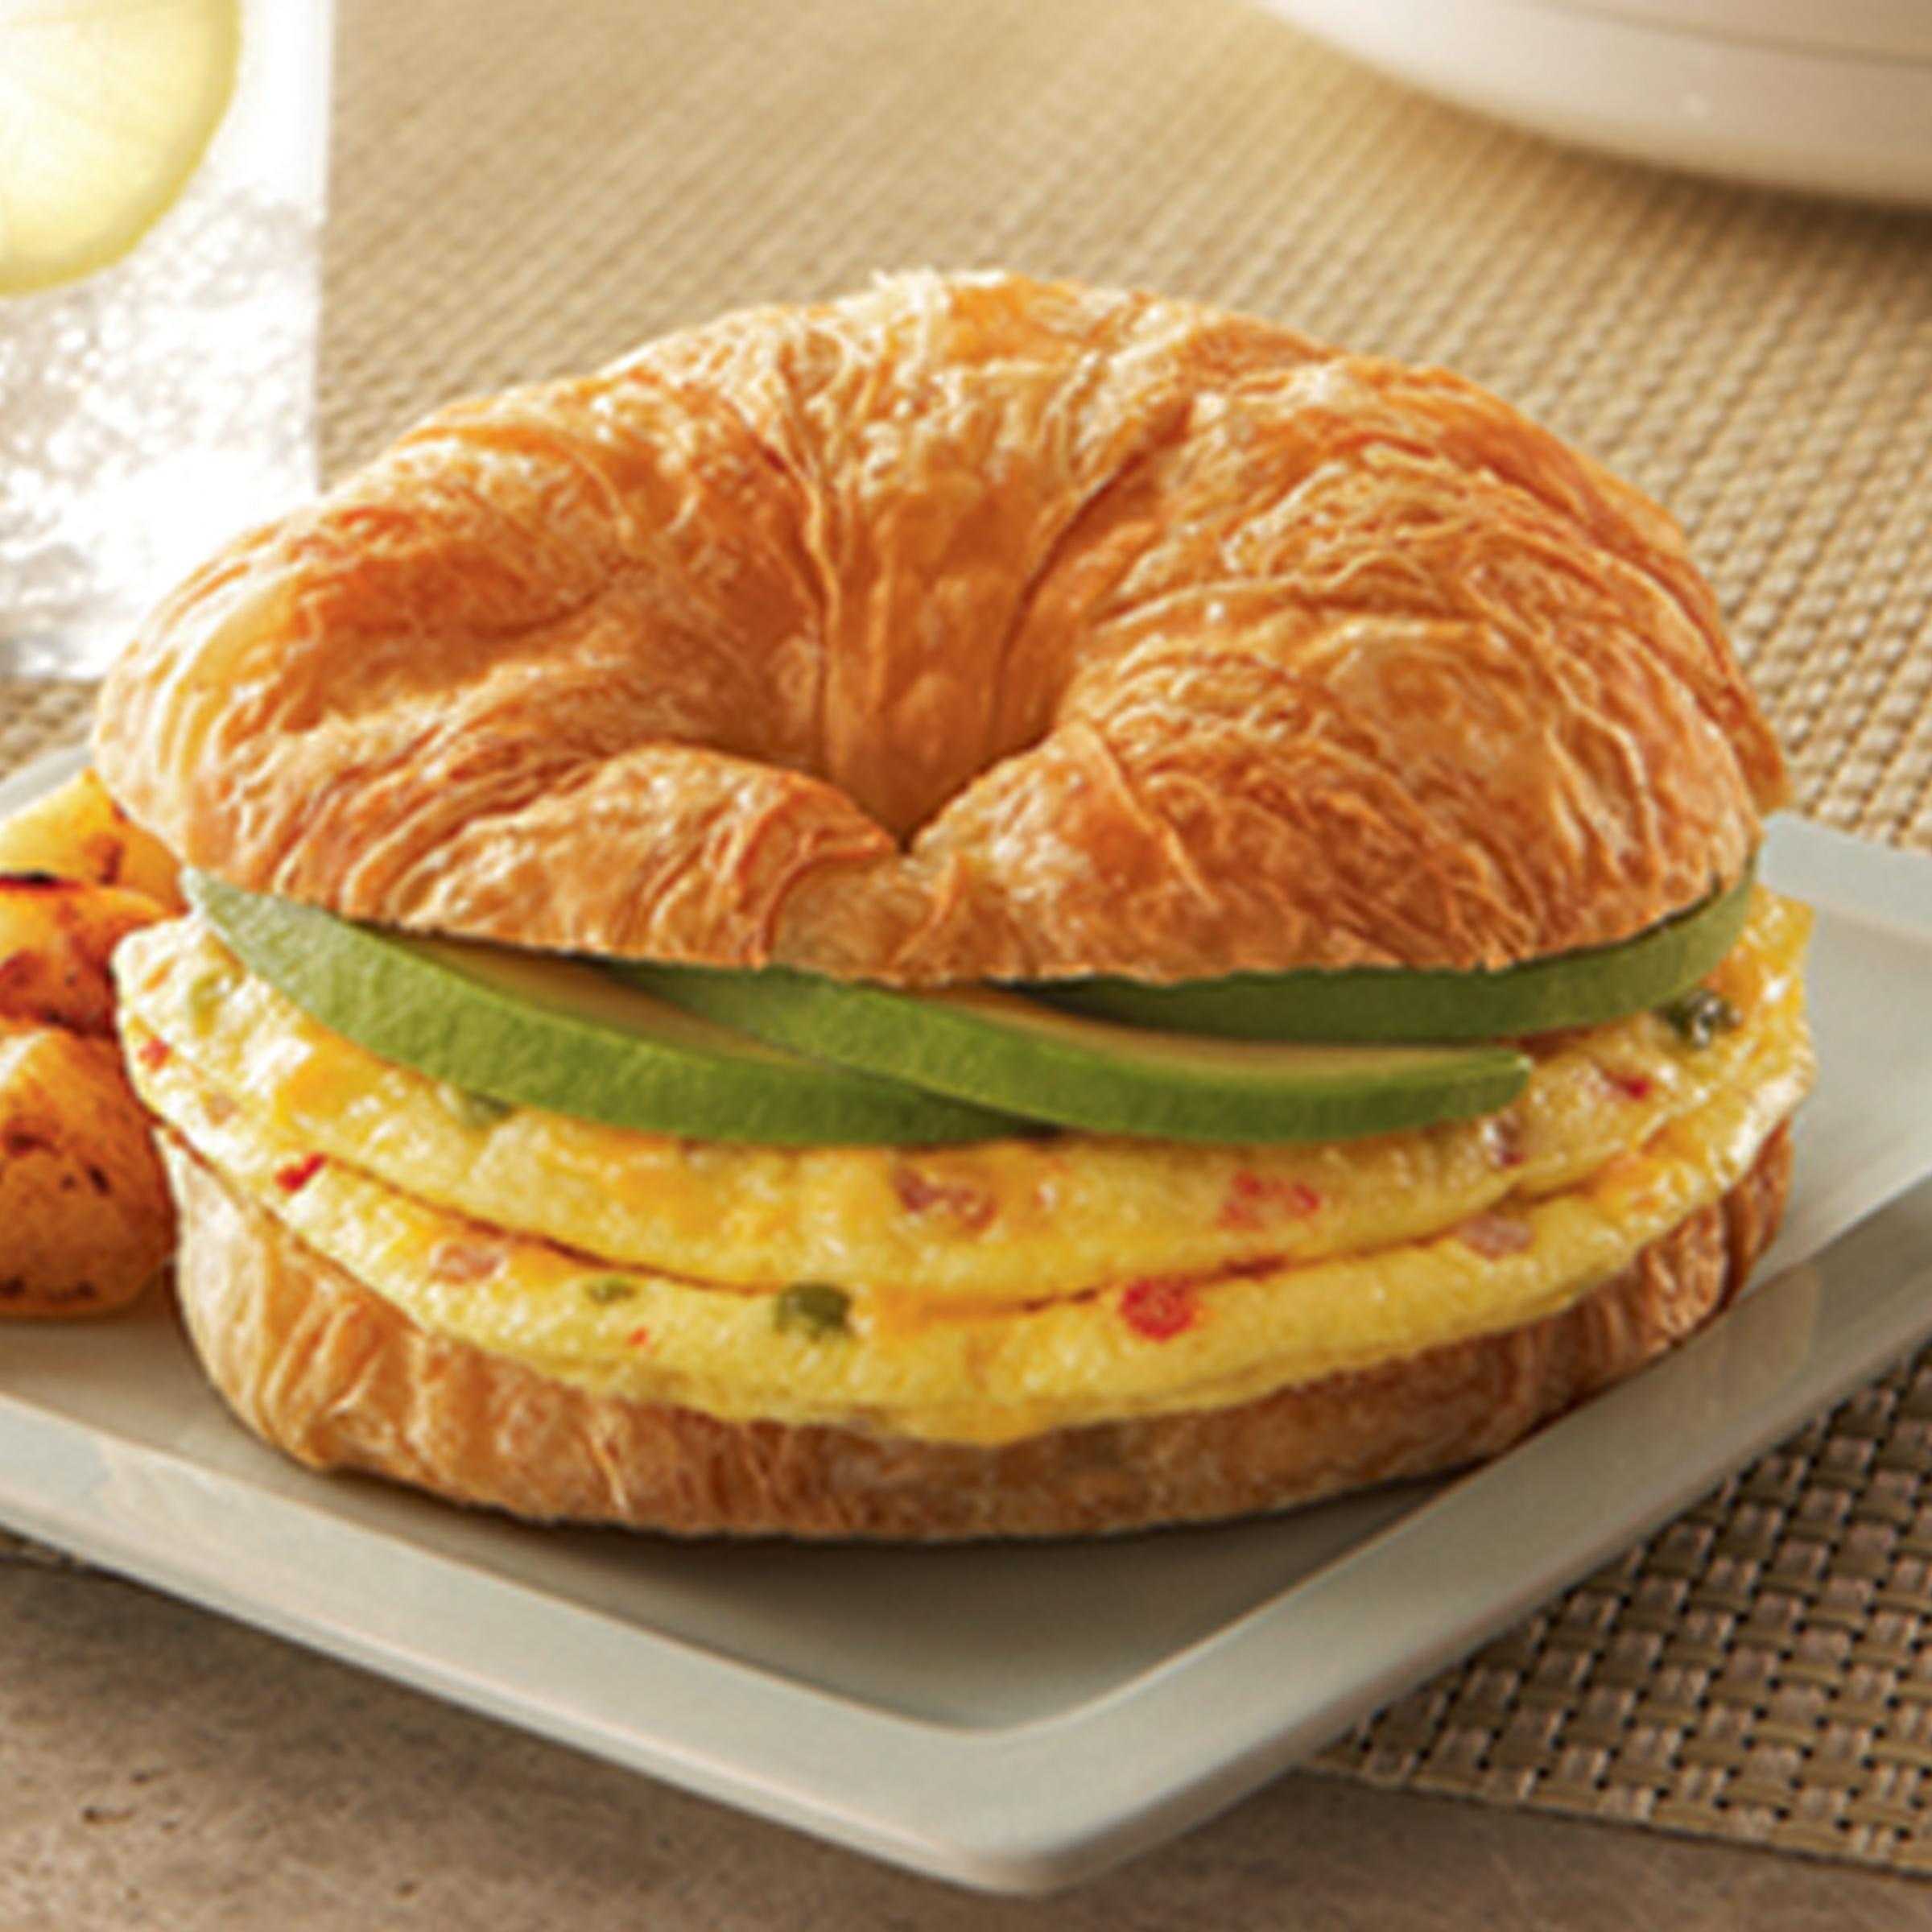 Papetti’s® Fully Cooked 4.75” x 2.25” Fold Frittata Egg Patties with Cheddar Cheese, Ham, Onions and Red & Green Pepper, 48/3 oz